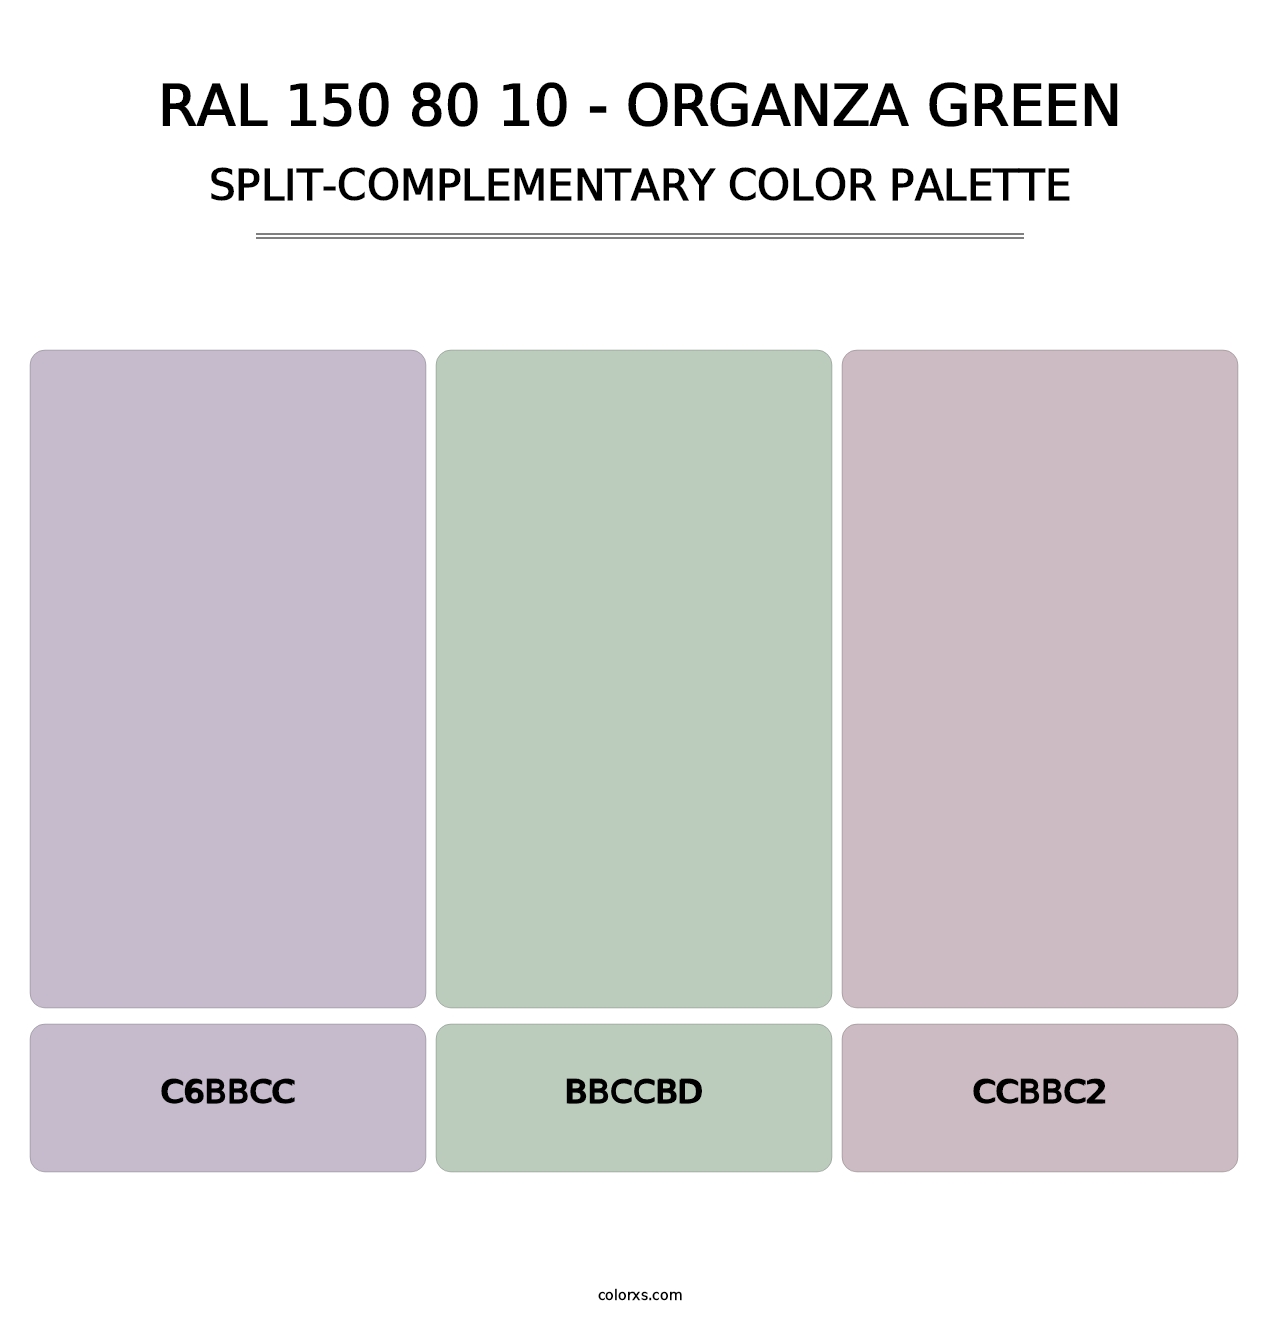 RAL 150 80 10 - Organza Green - Split-Complementary Color Palette